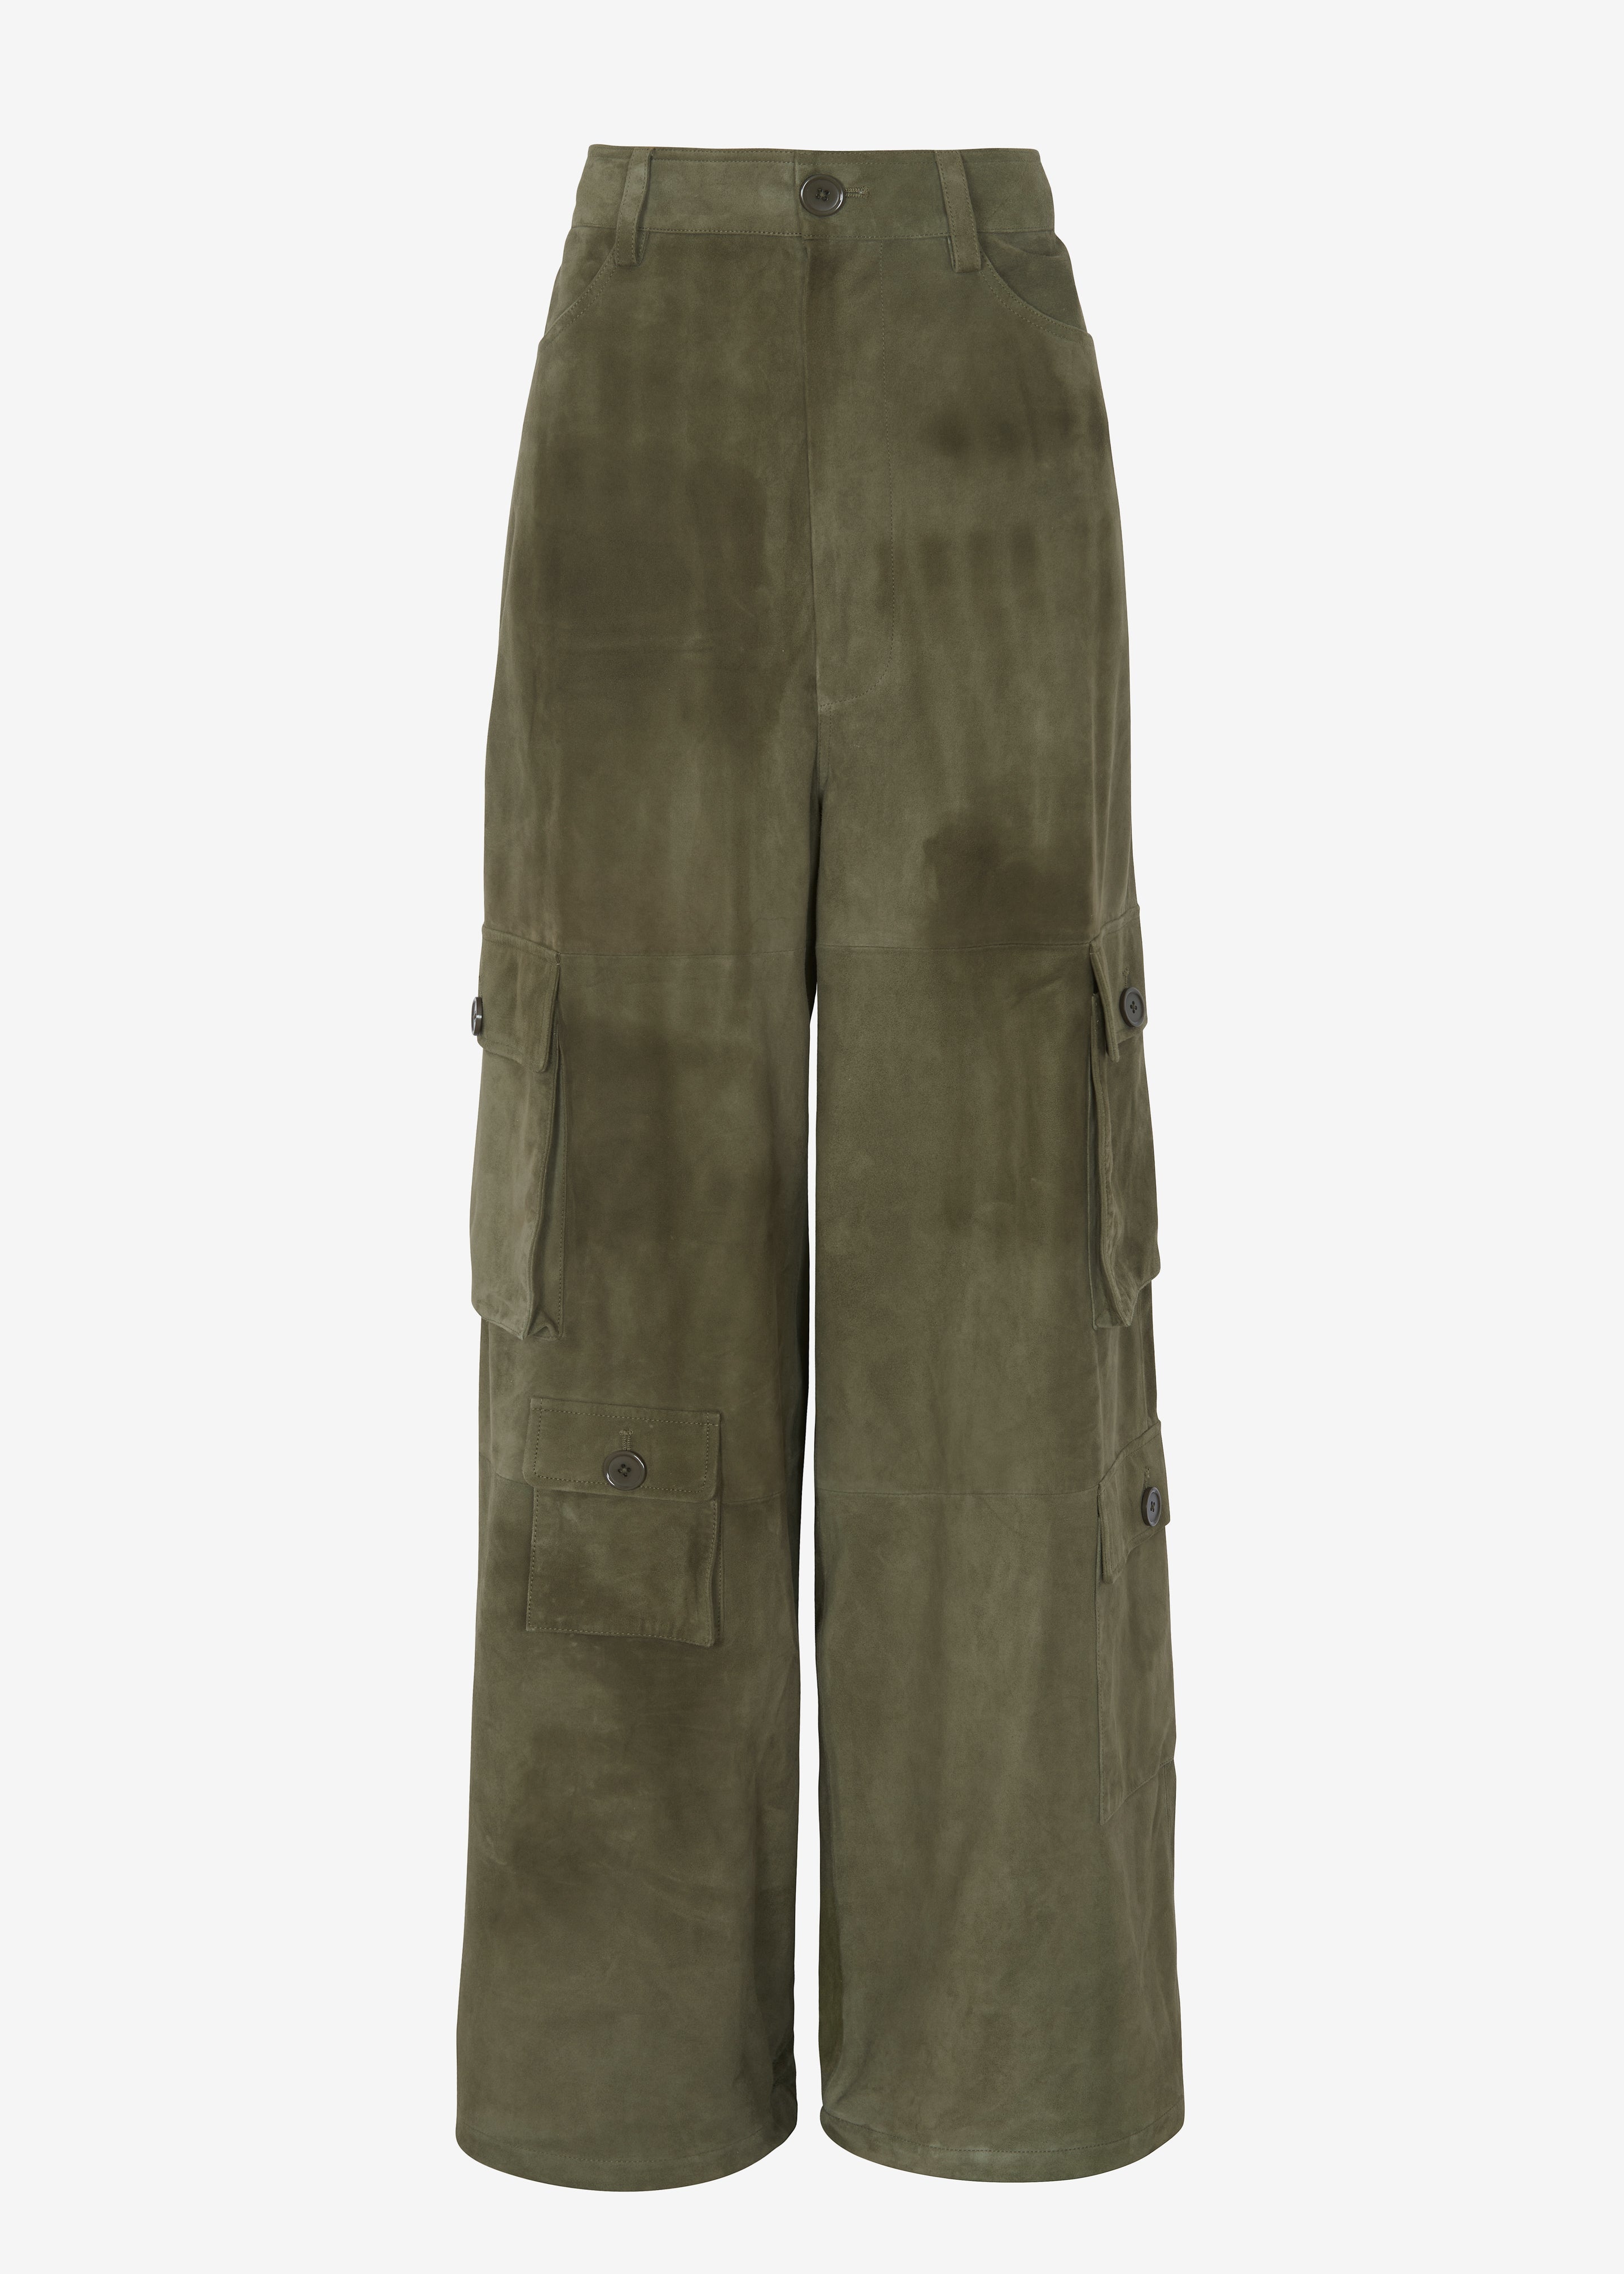 Hailey Suede Oversized Cargo Pants - Olive - 9